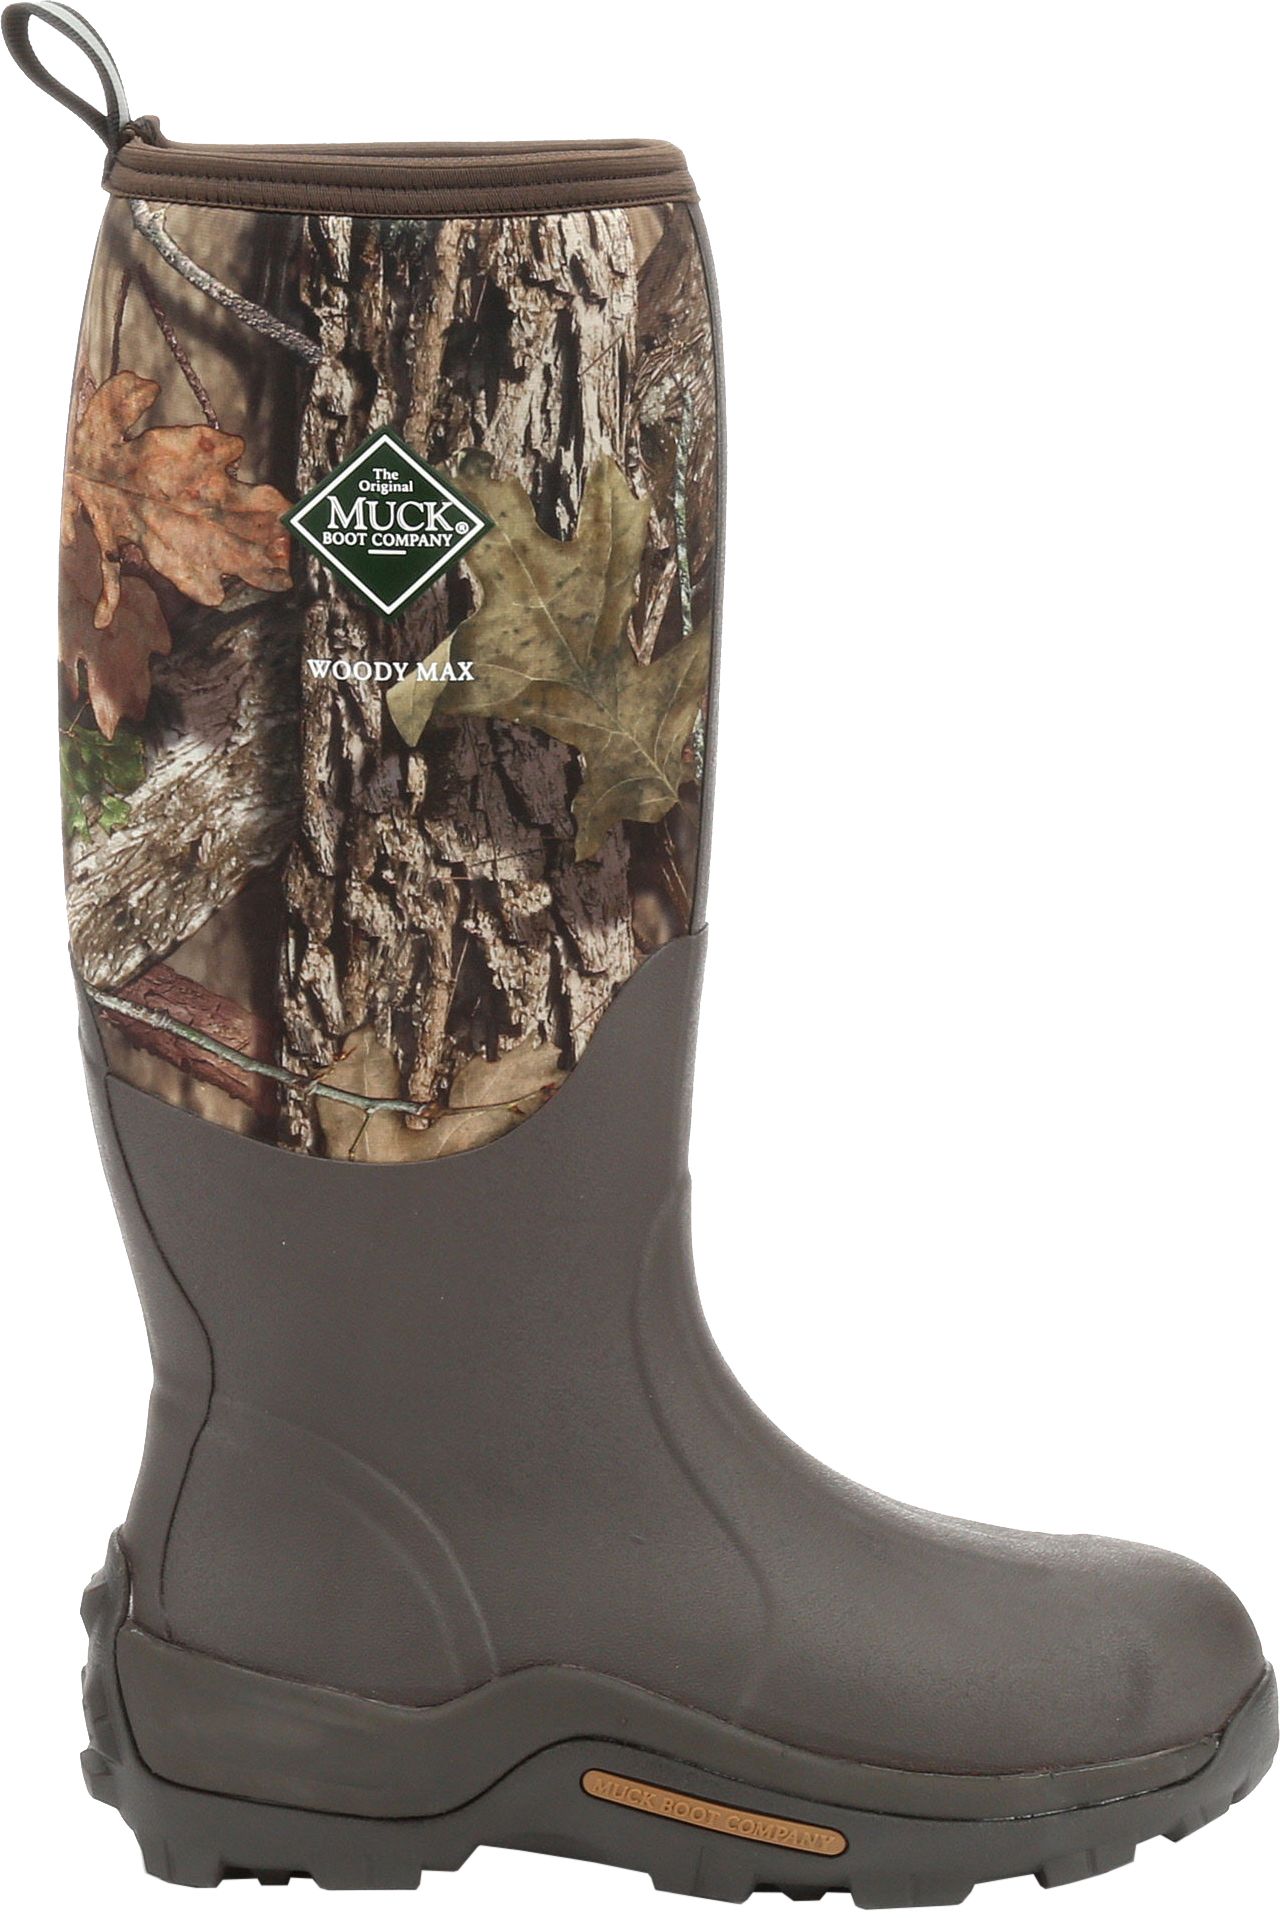 muck boots for cold weather hunting